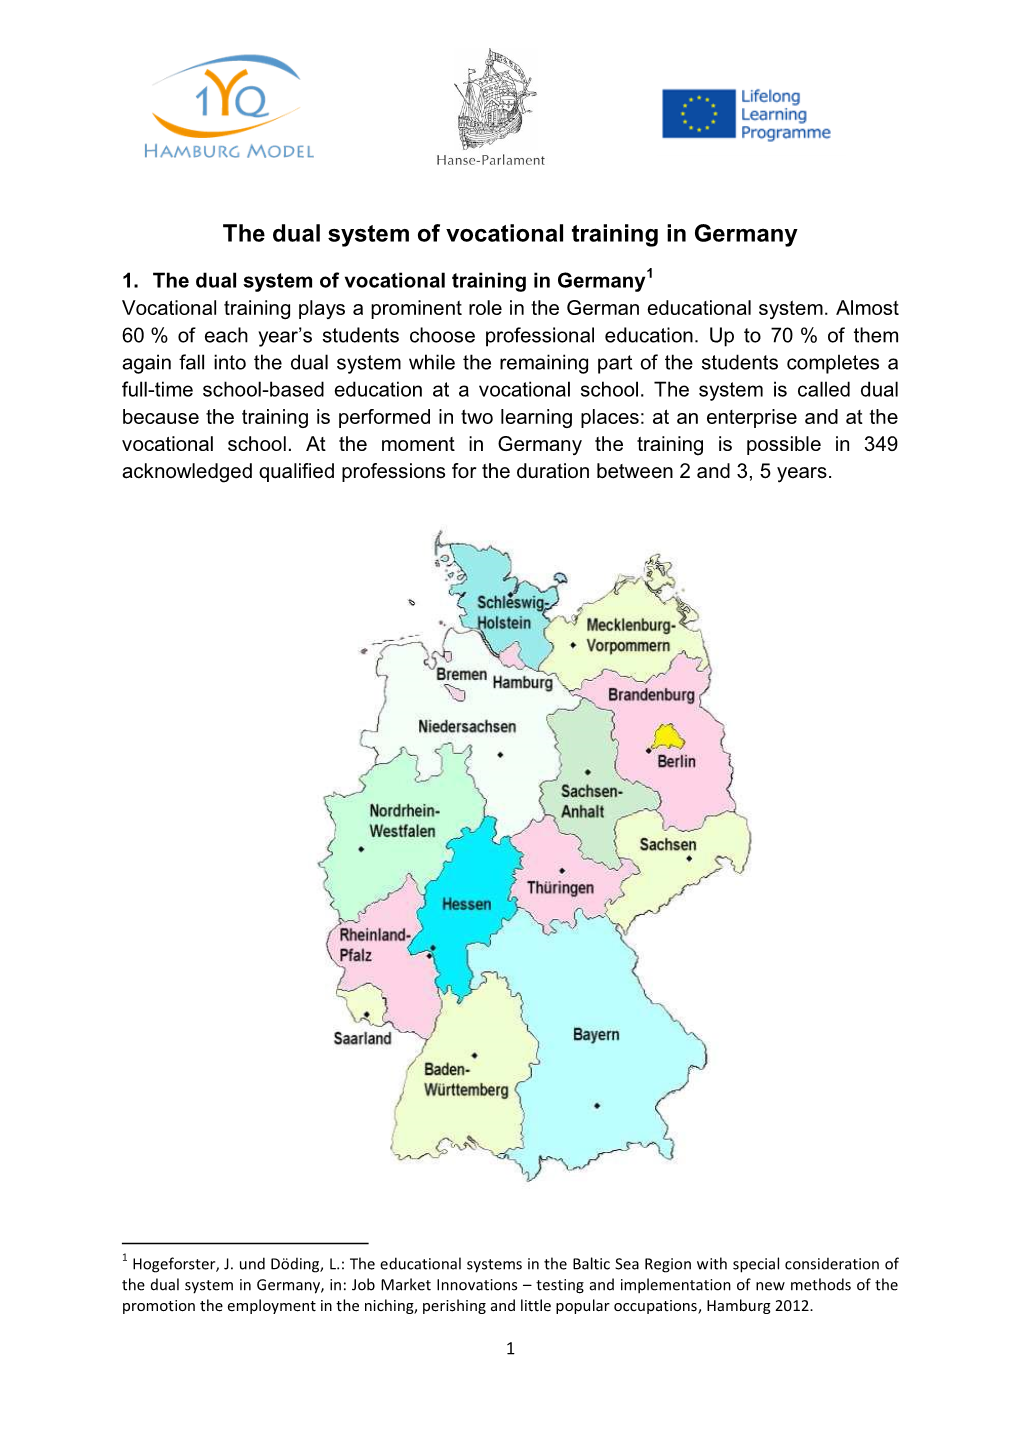 The Dual System of Vocational Training in Germany